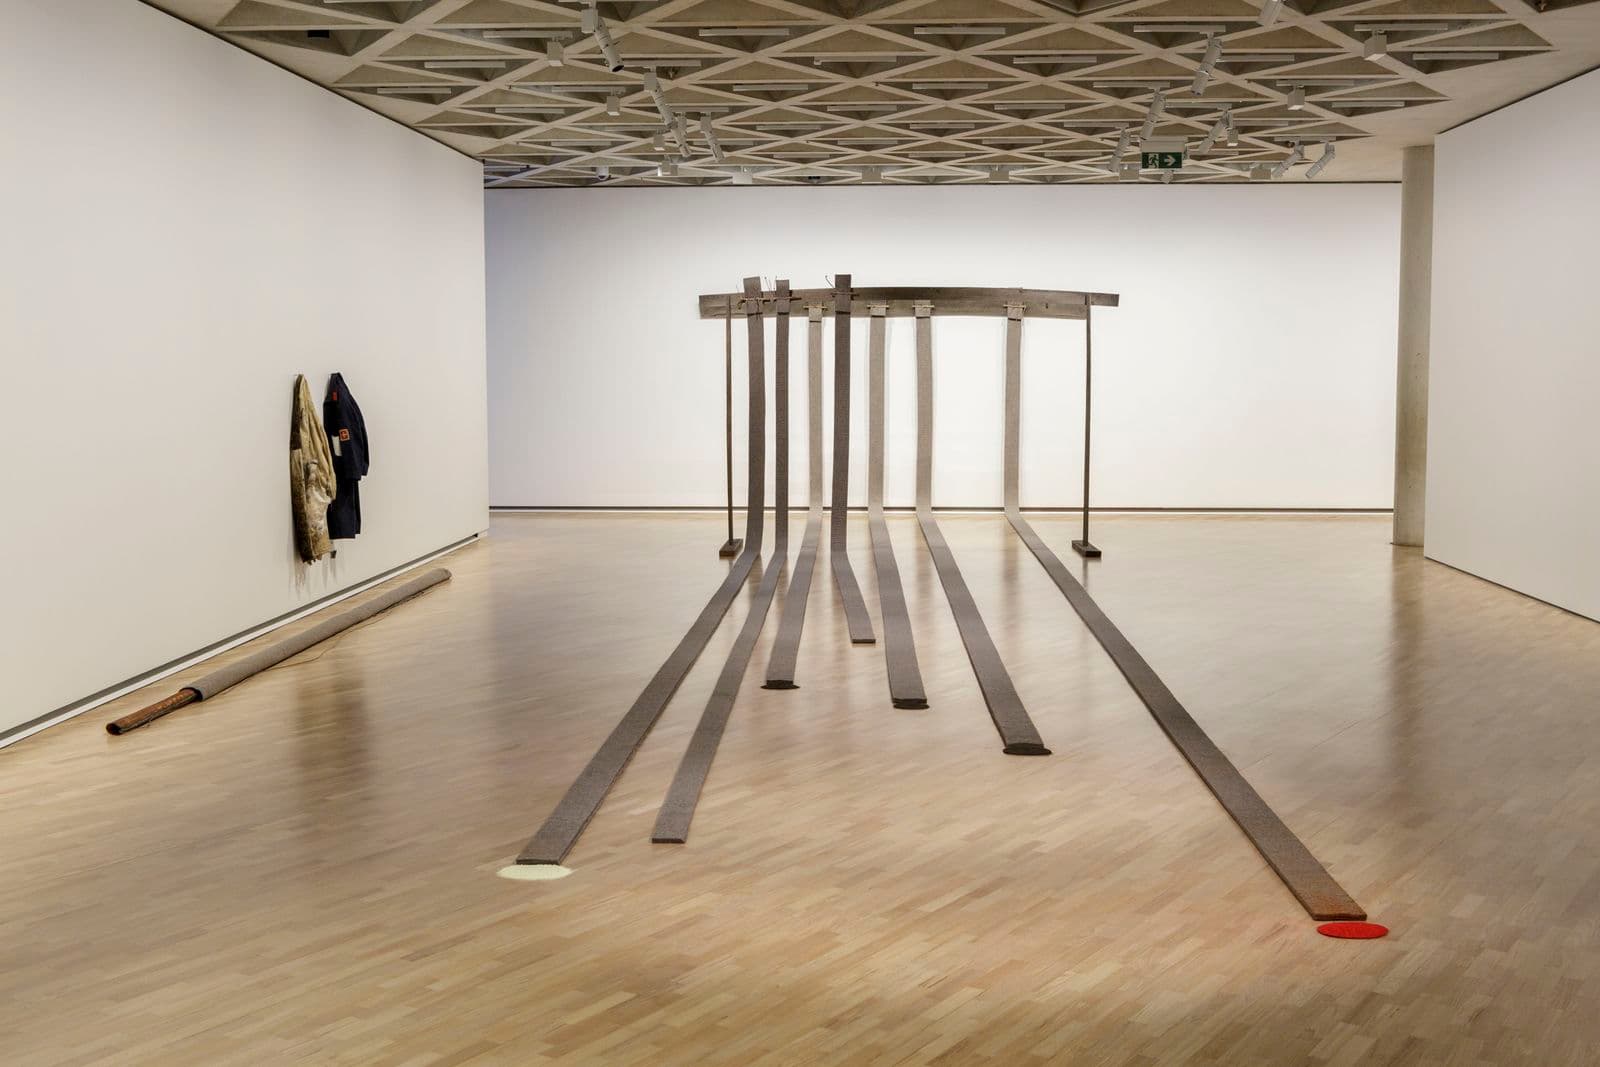 An installation by Joseph Beuys with seven large metal poles coming down a wall and across the floor.